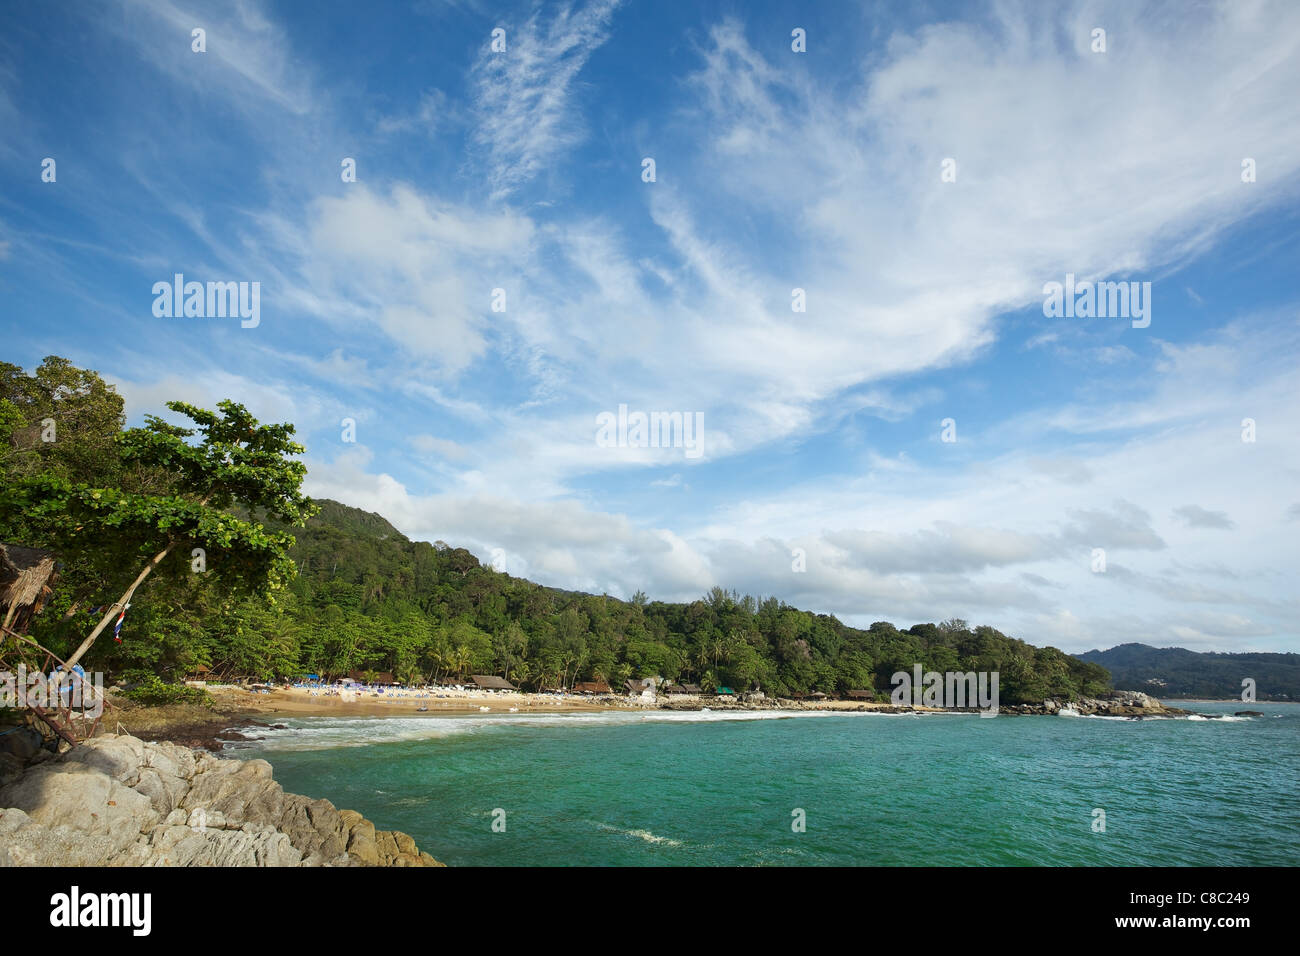 View of the beach at Singh cape. Phuket island, Thailand. Super-wide angle shot. Stock Photo